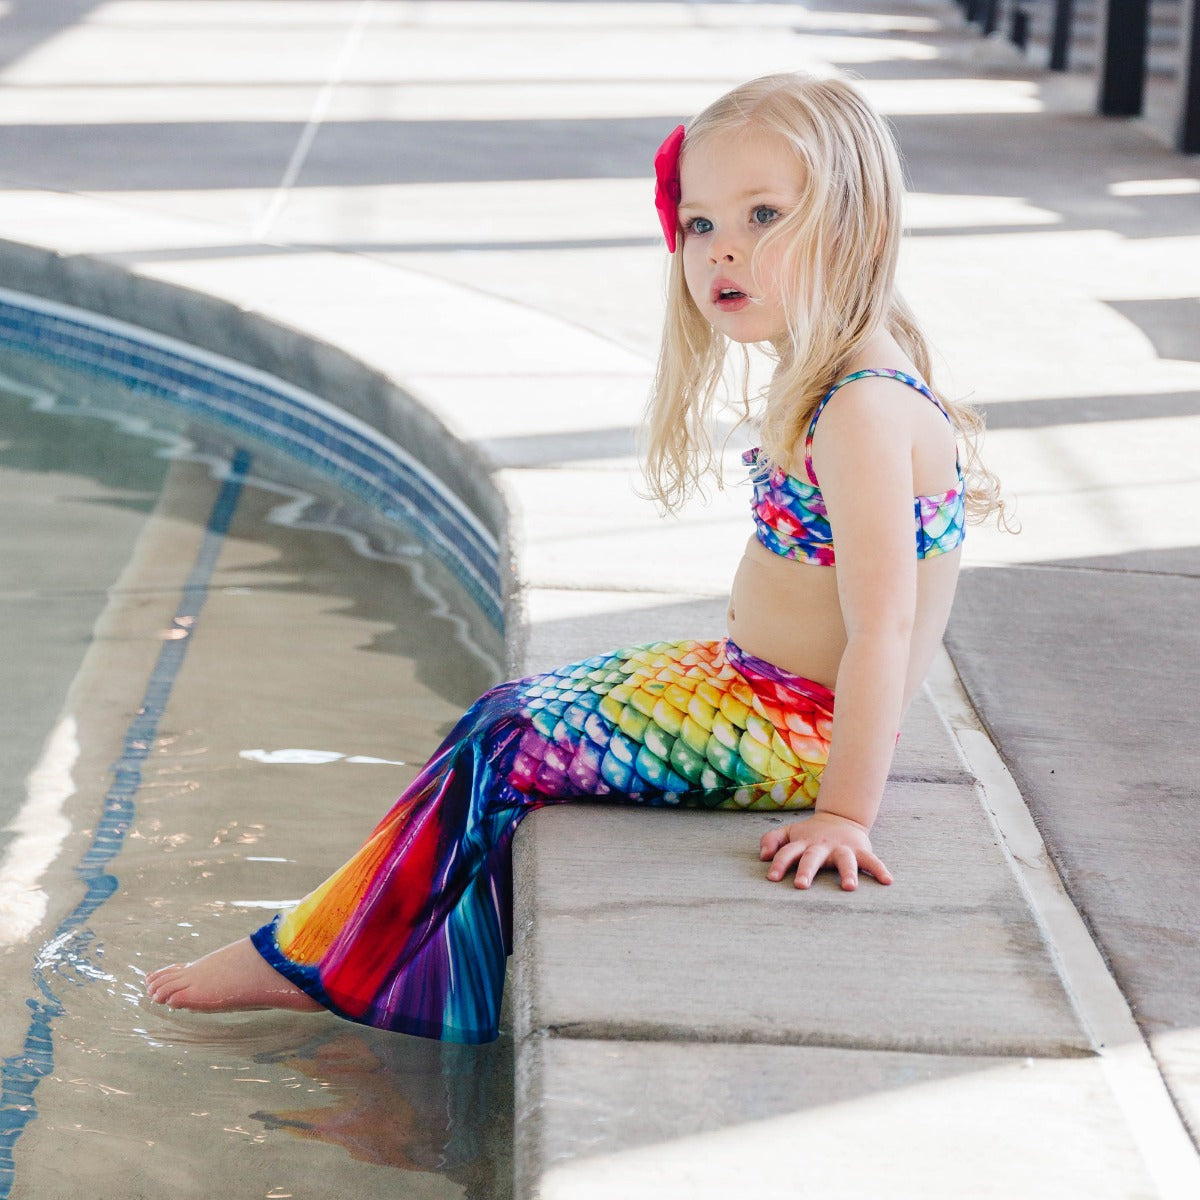 Rainbow Reef Toddler Tail and Bandeau Set